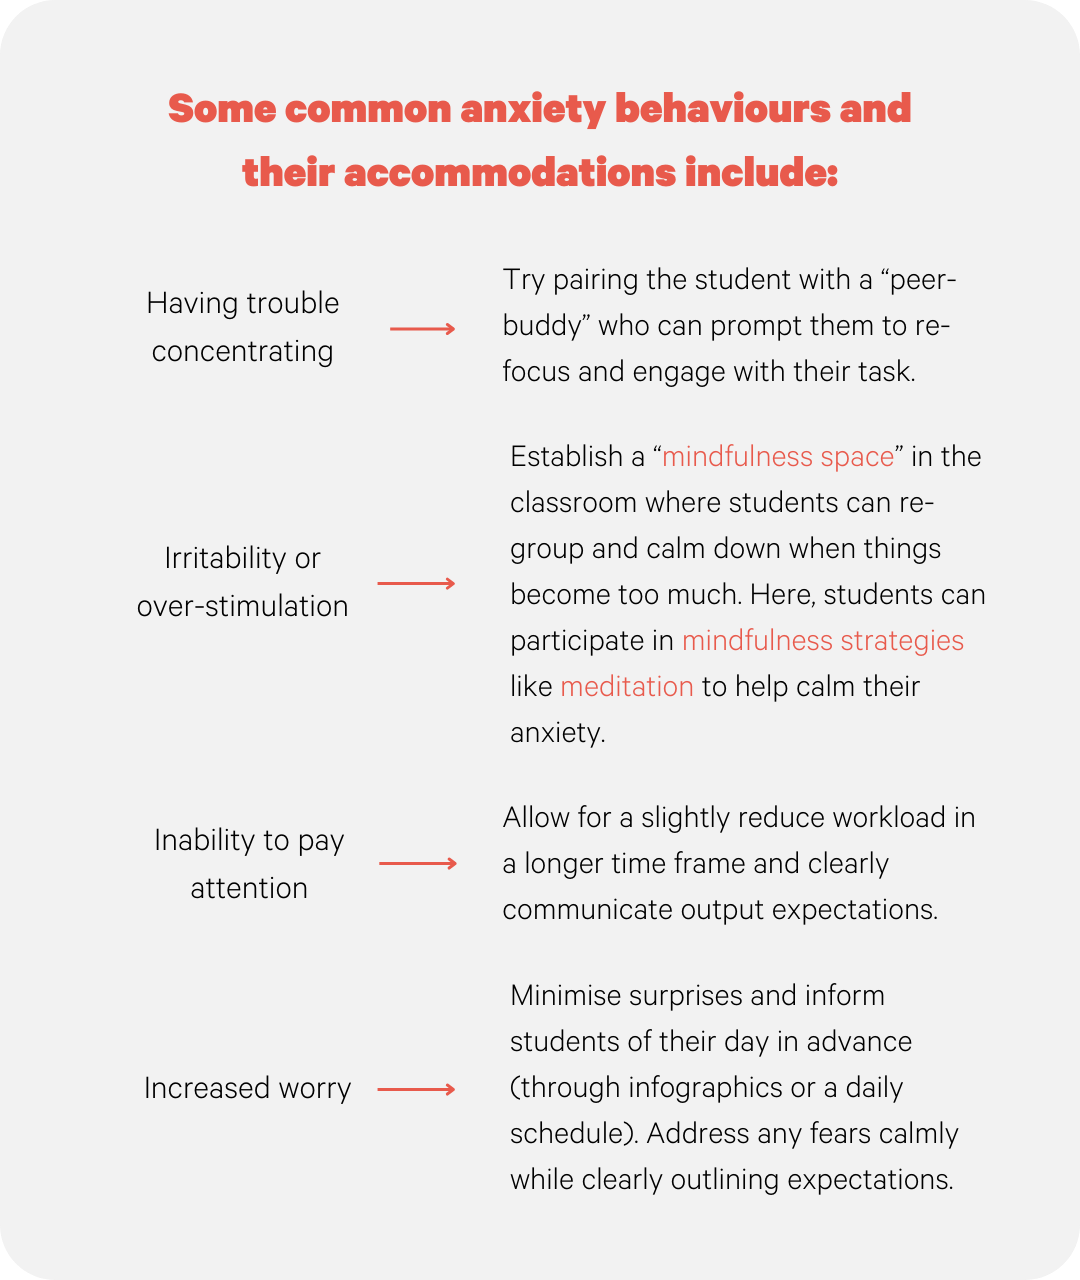 Some common anxiety behaviours and their accommodations include (1080 x 1280 px)